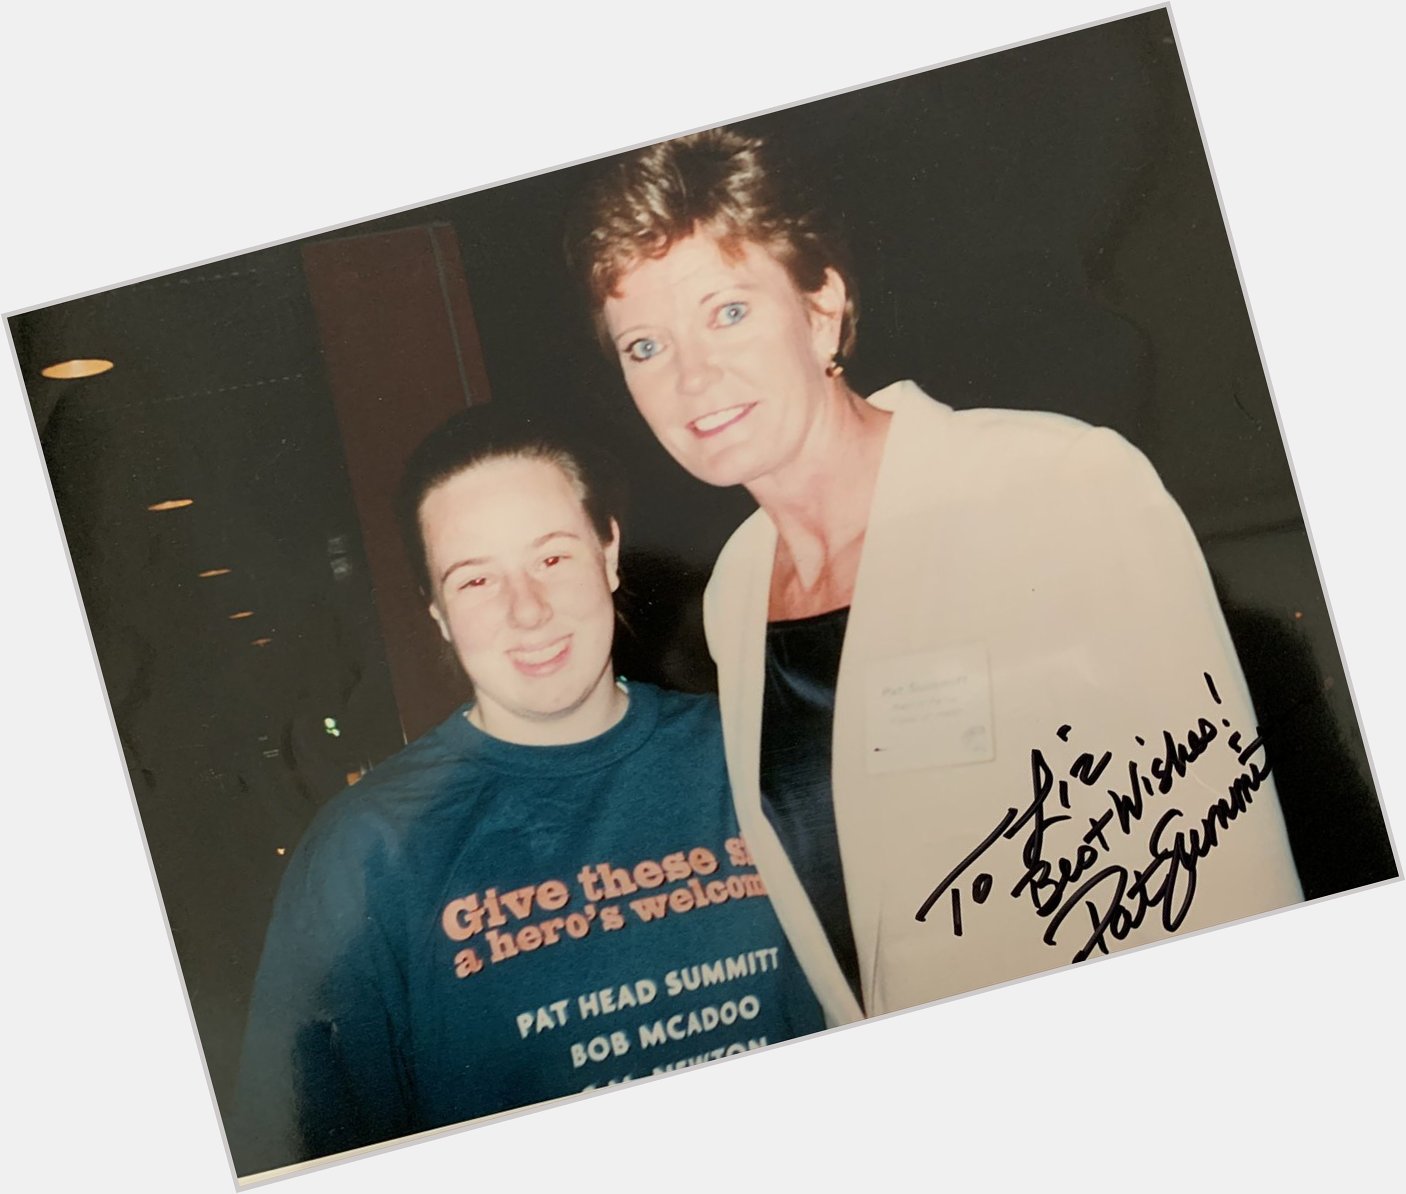 From this die hard UConn fan, Happy 70th Birthday to the best to ever do it, Pat Summitt! 